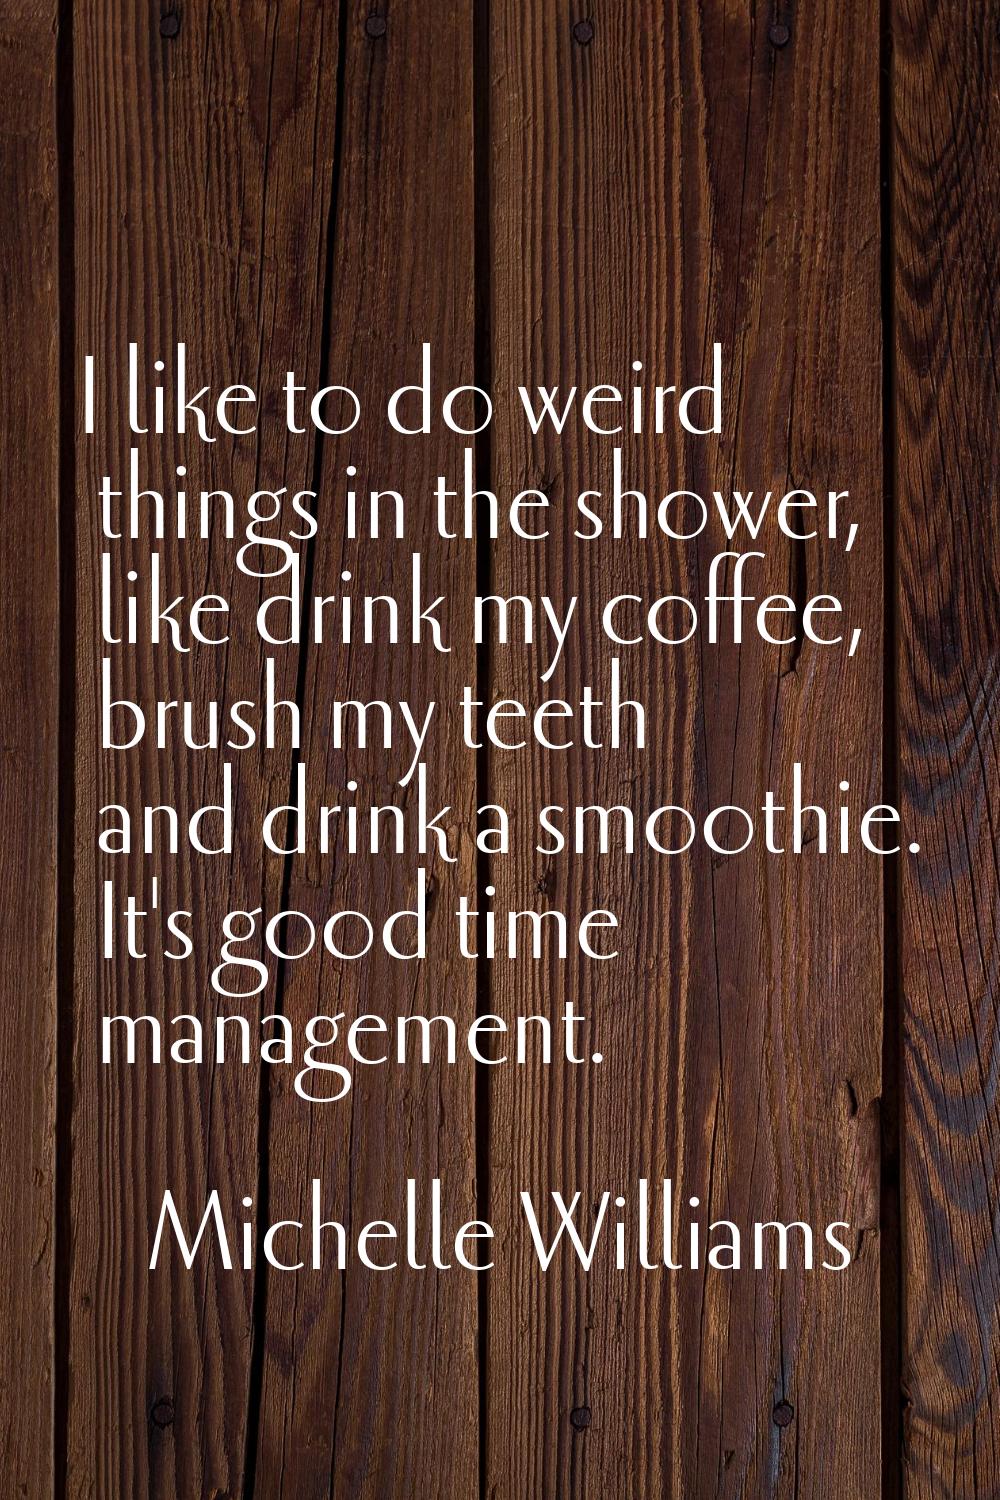 I like to do weird things in the shower, like drink my coffee, brush my teeth and drink a smoothie.